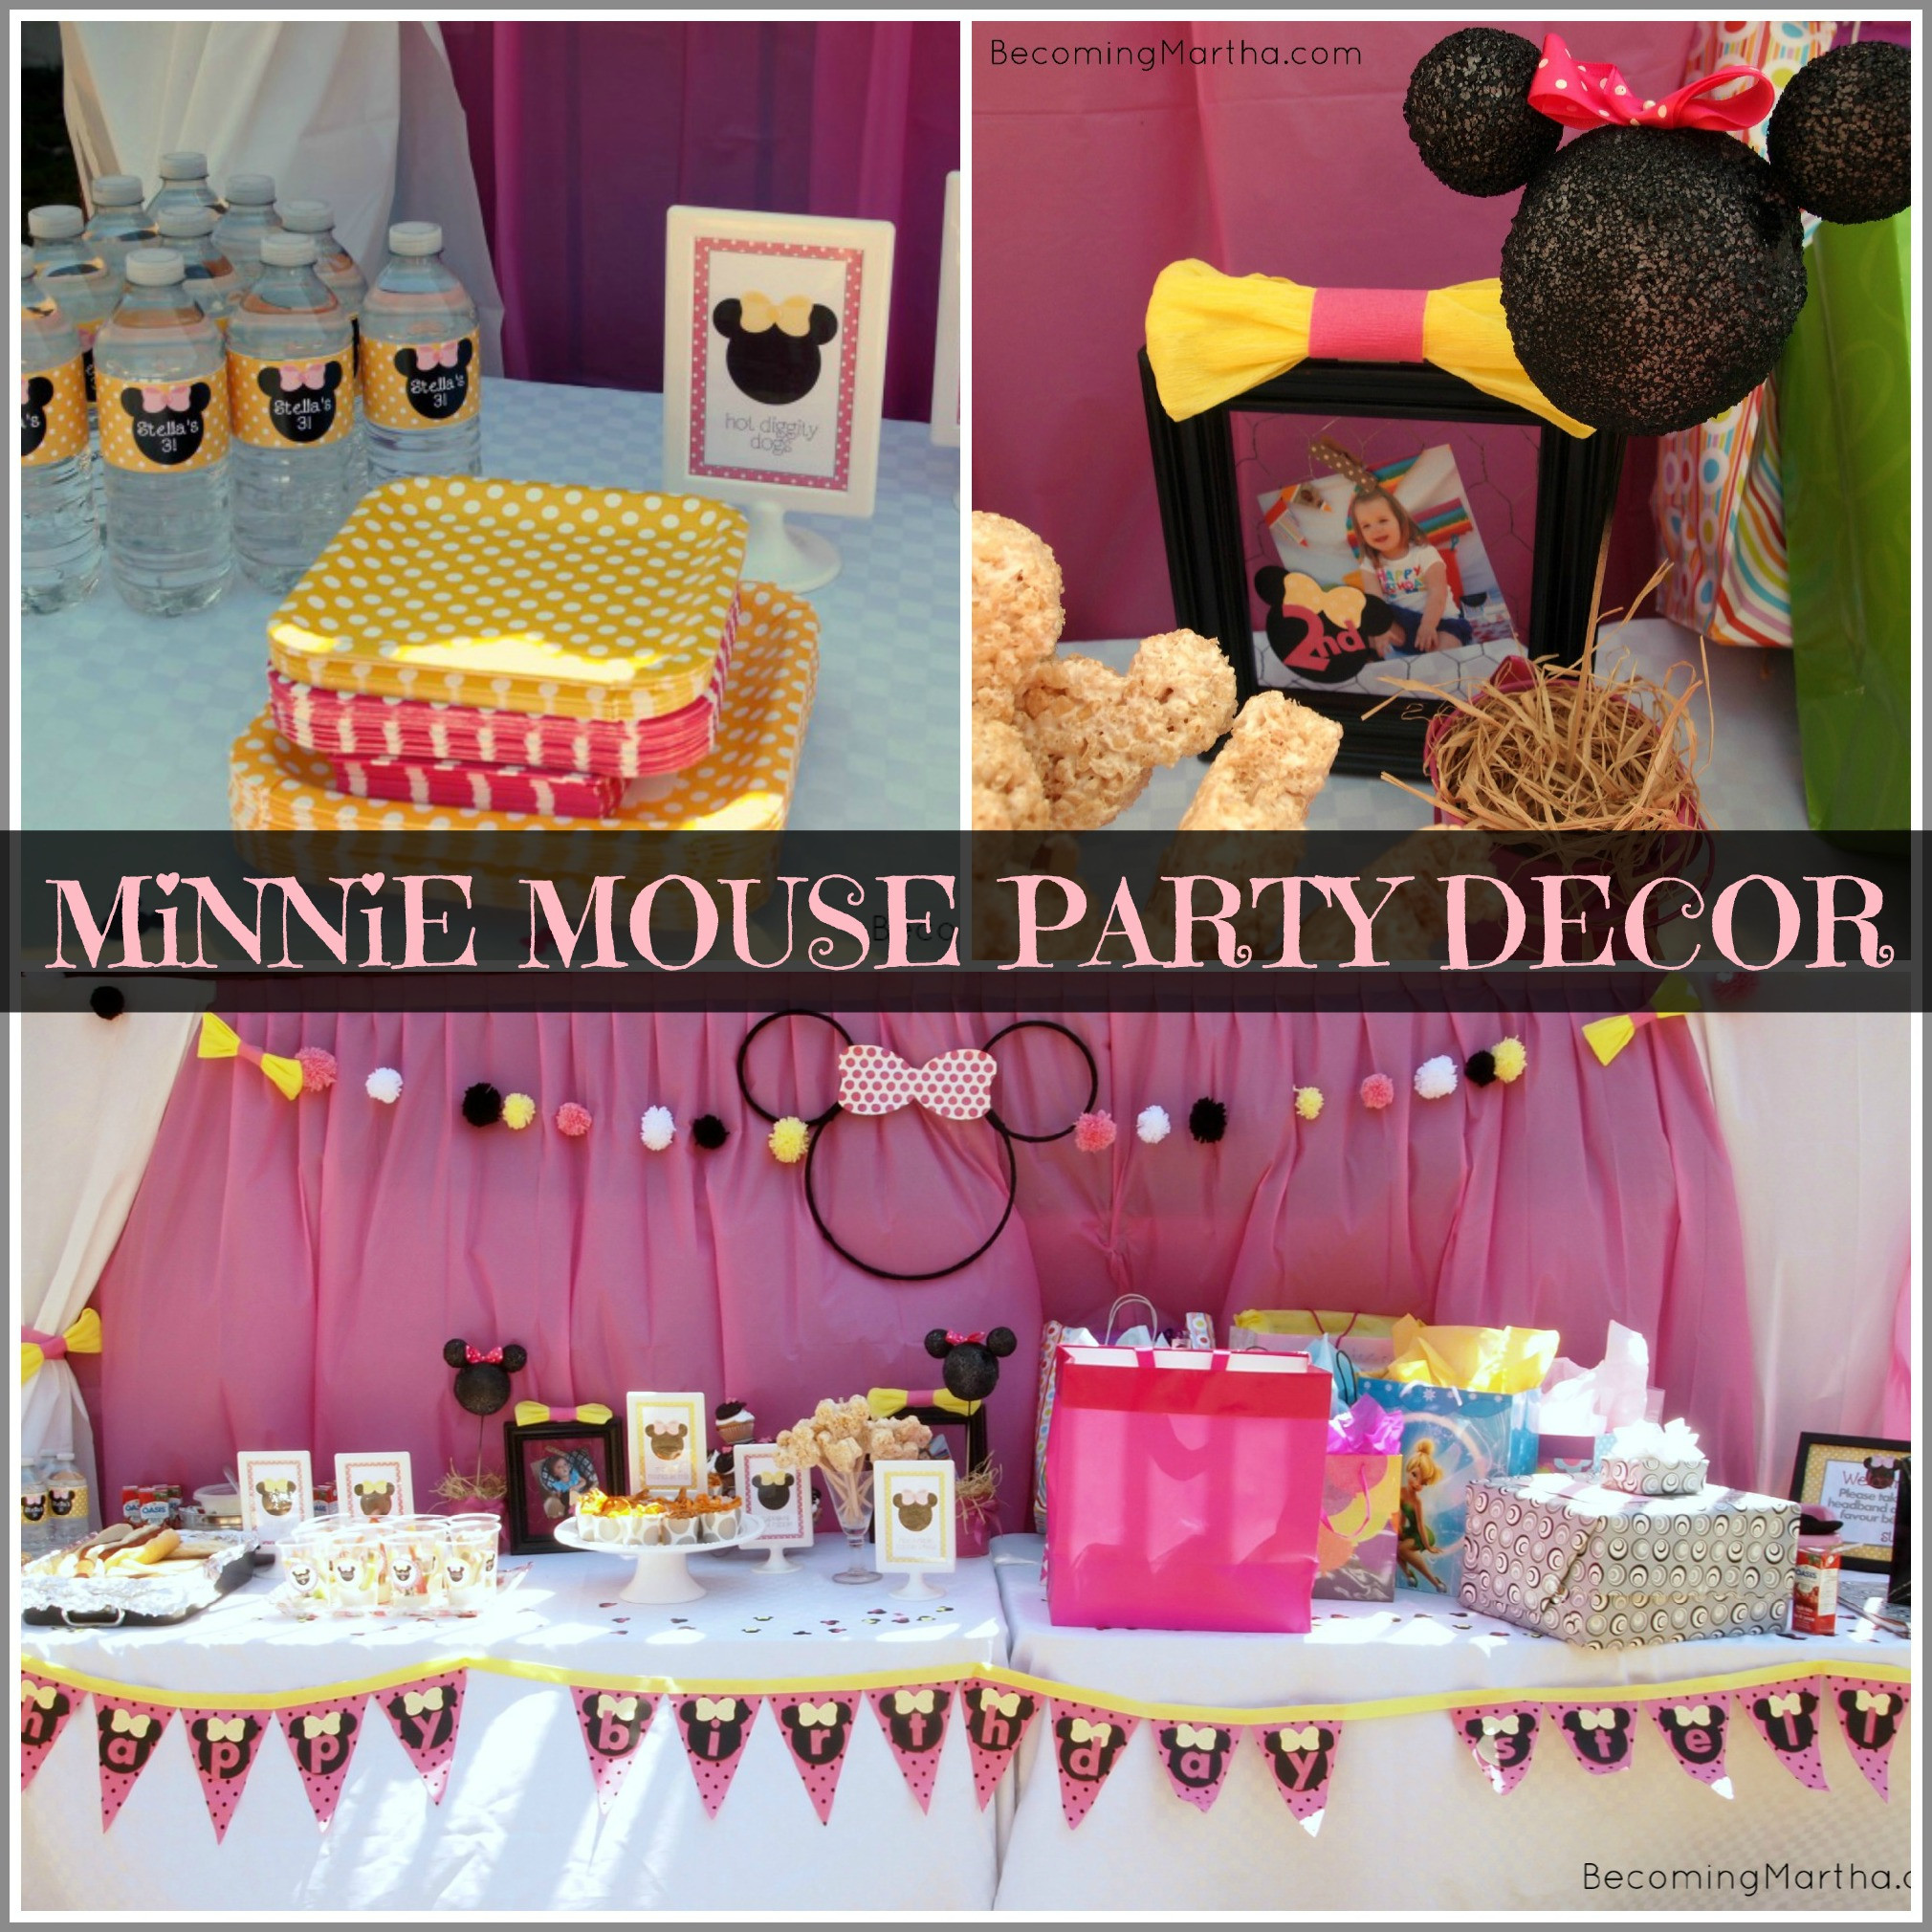 Minnie Mouse Birthday Party Decoration Ideas
 Minnie Mouse Party Decor The Simply Crafted Life